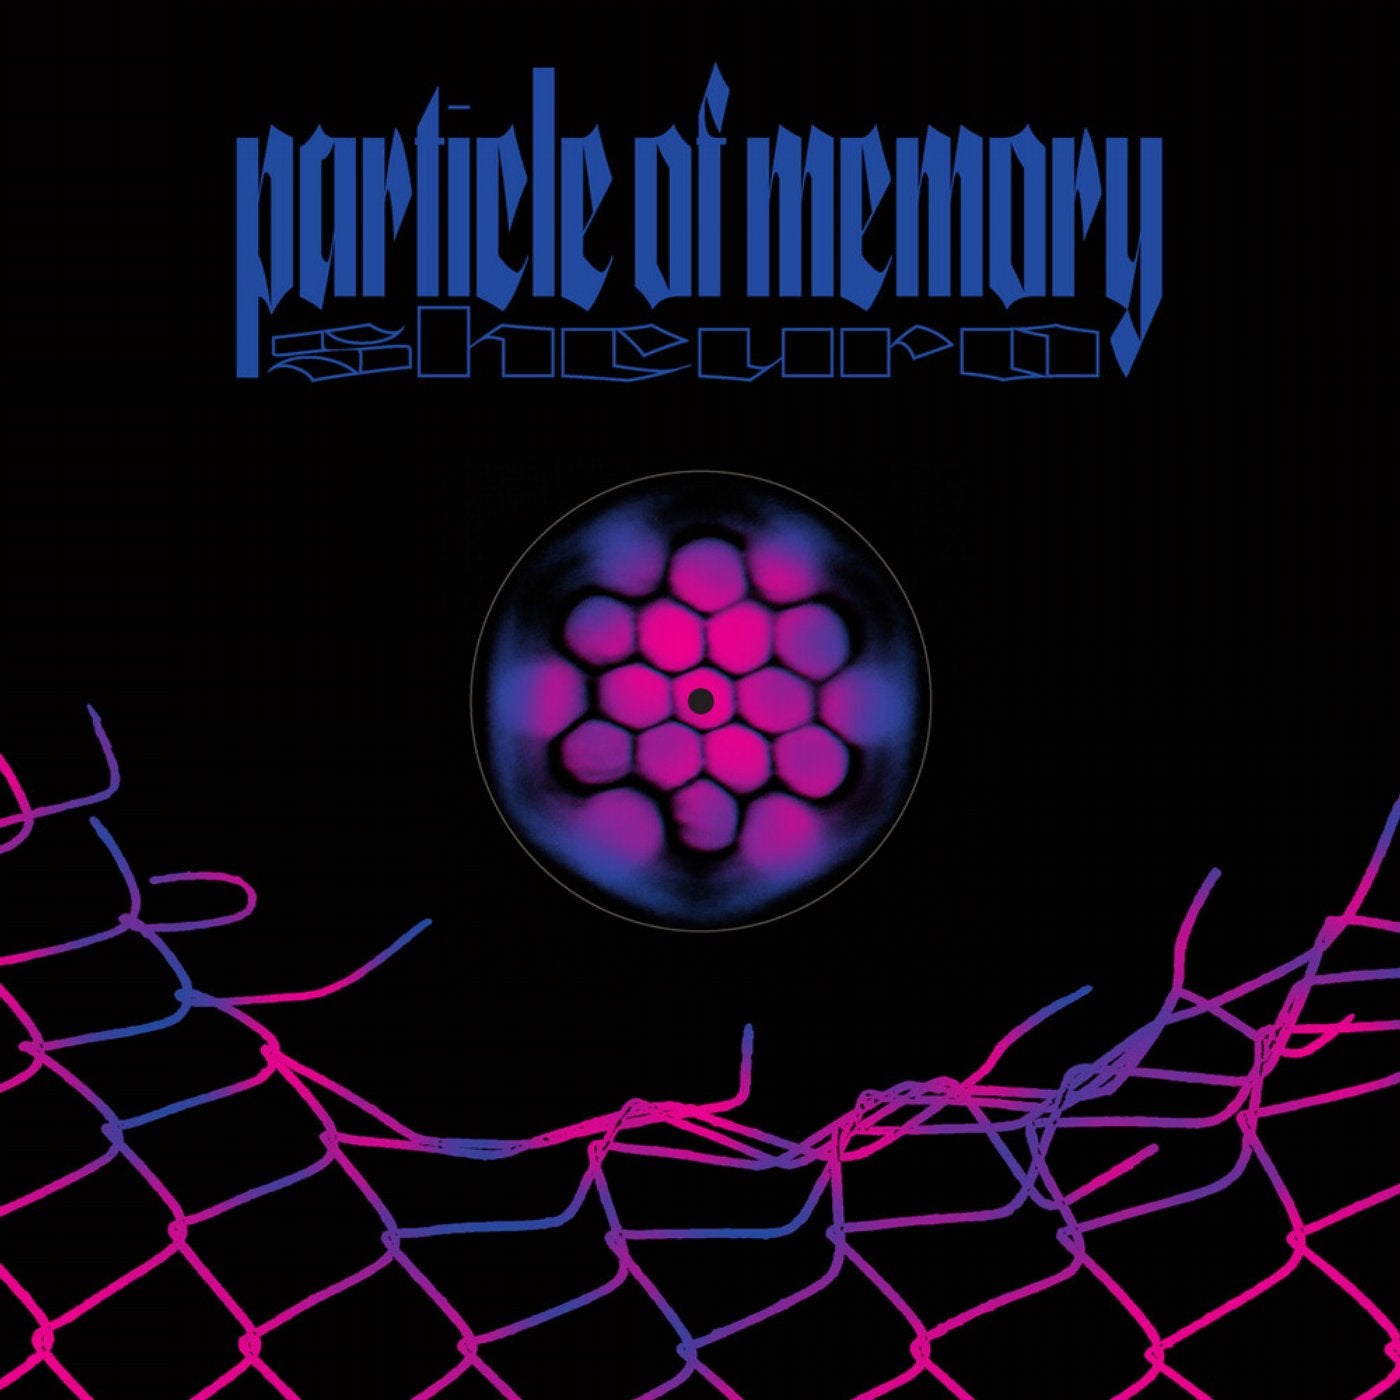 Particle of Memory